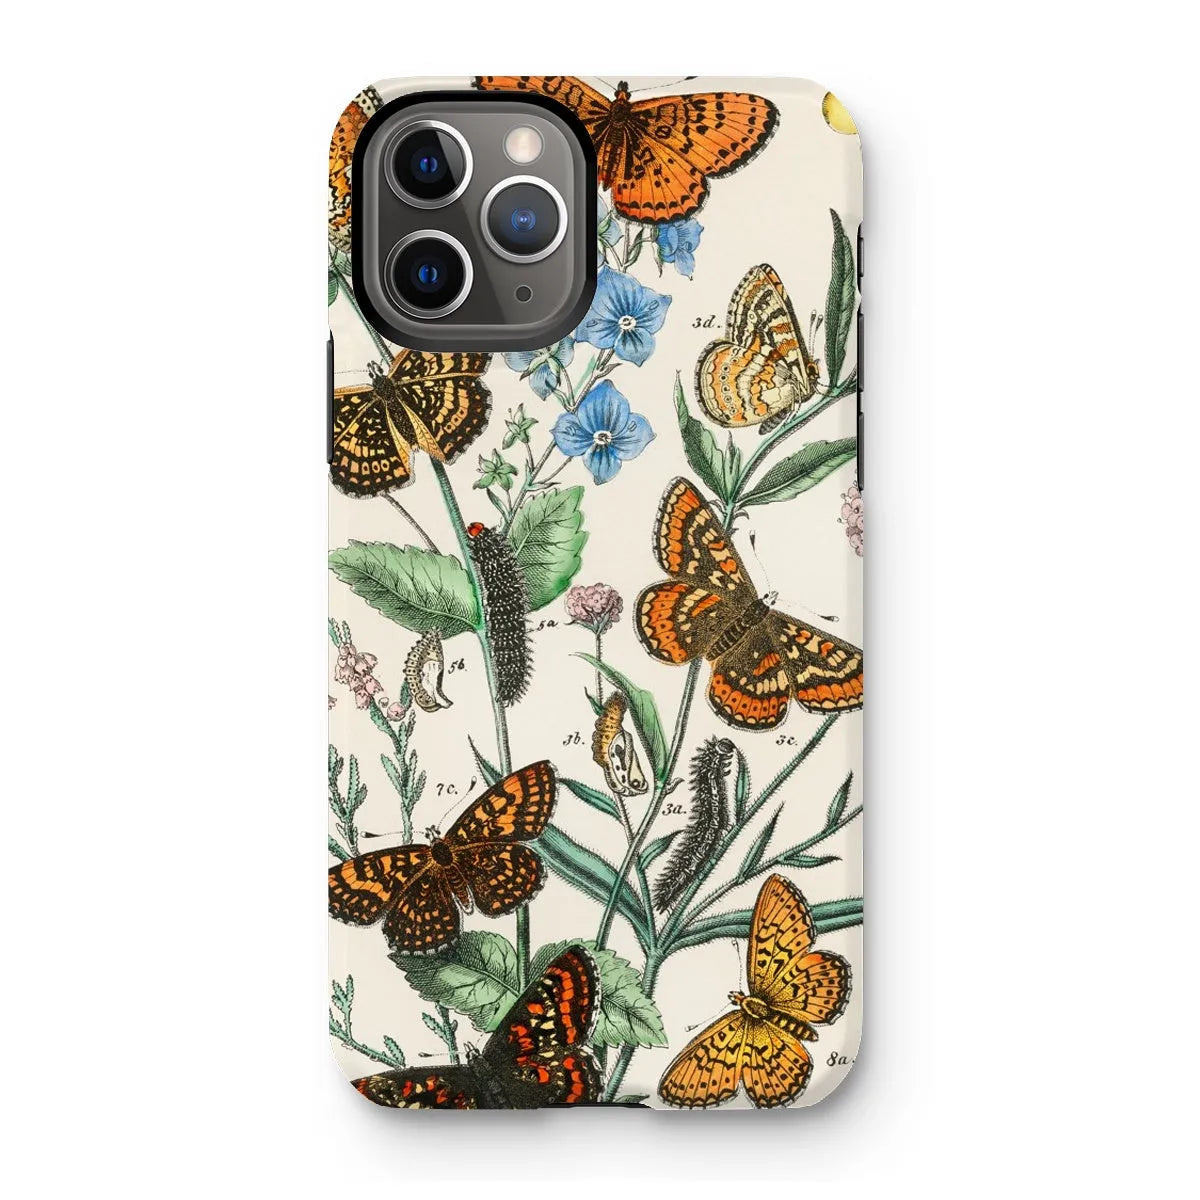 This Butterfly Aesthetic Art Phone Case - William Forsell Kirby - Iphone 11 Pro / Matte - Mobile Phone Cases